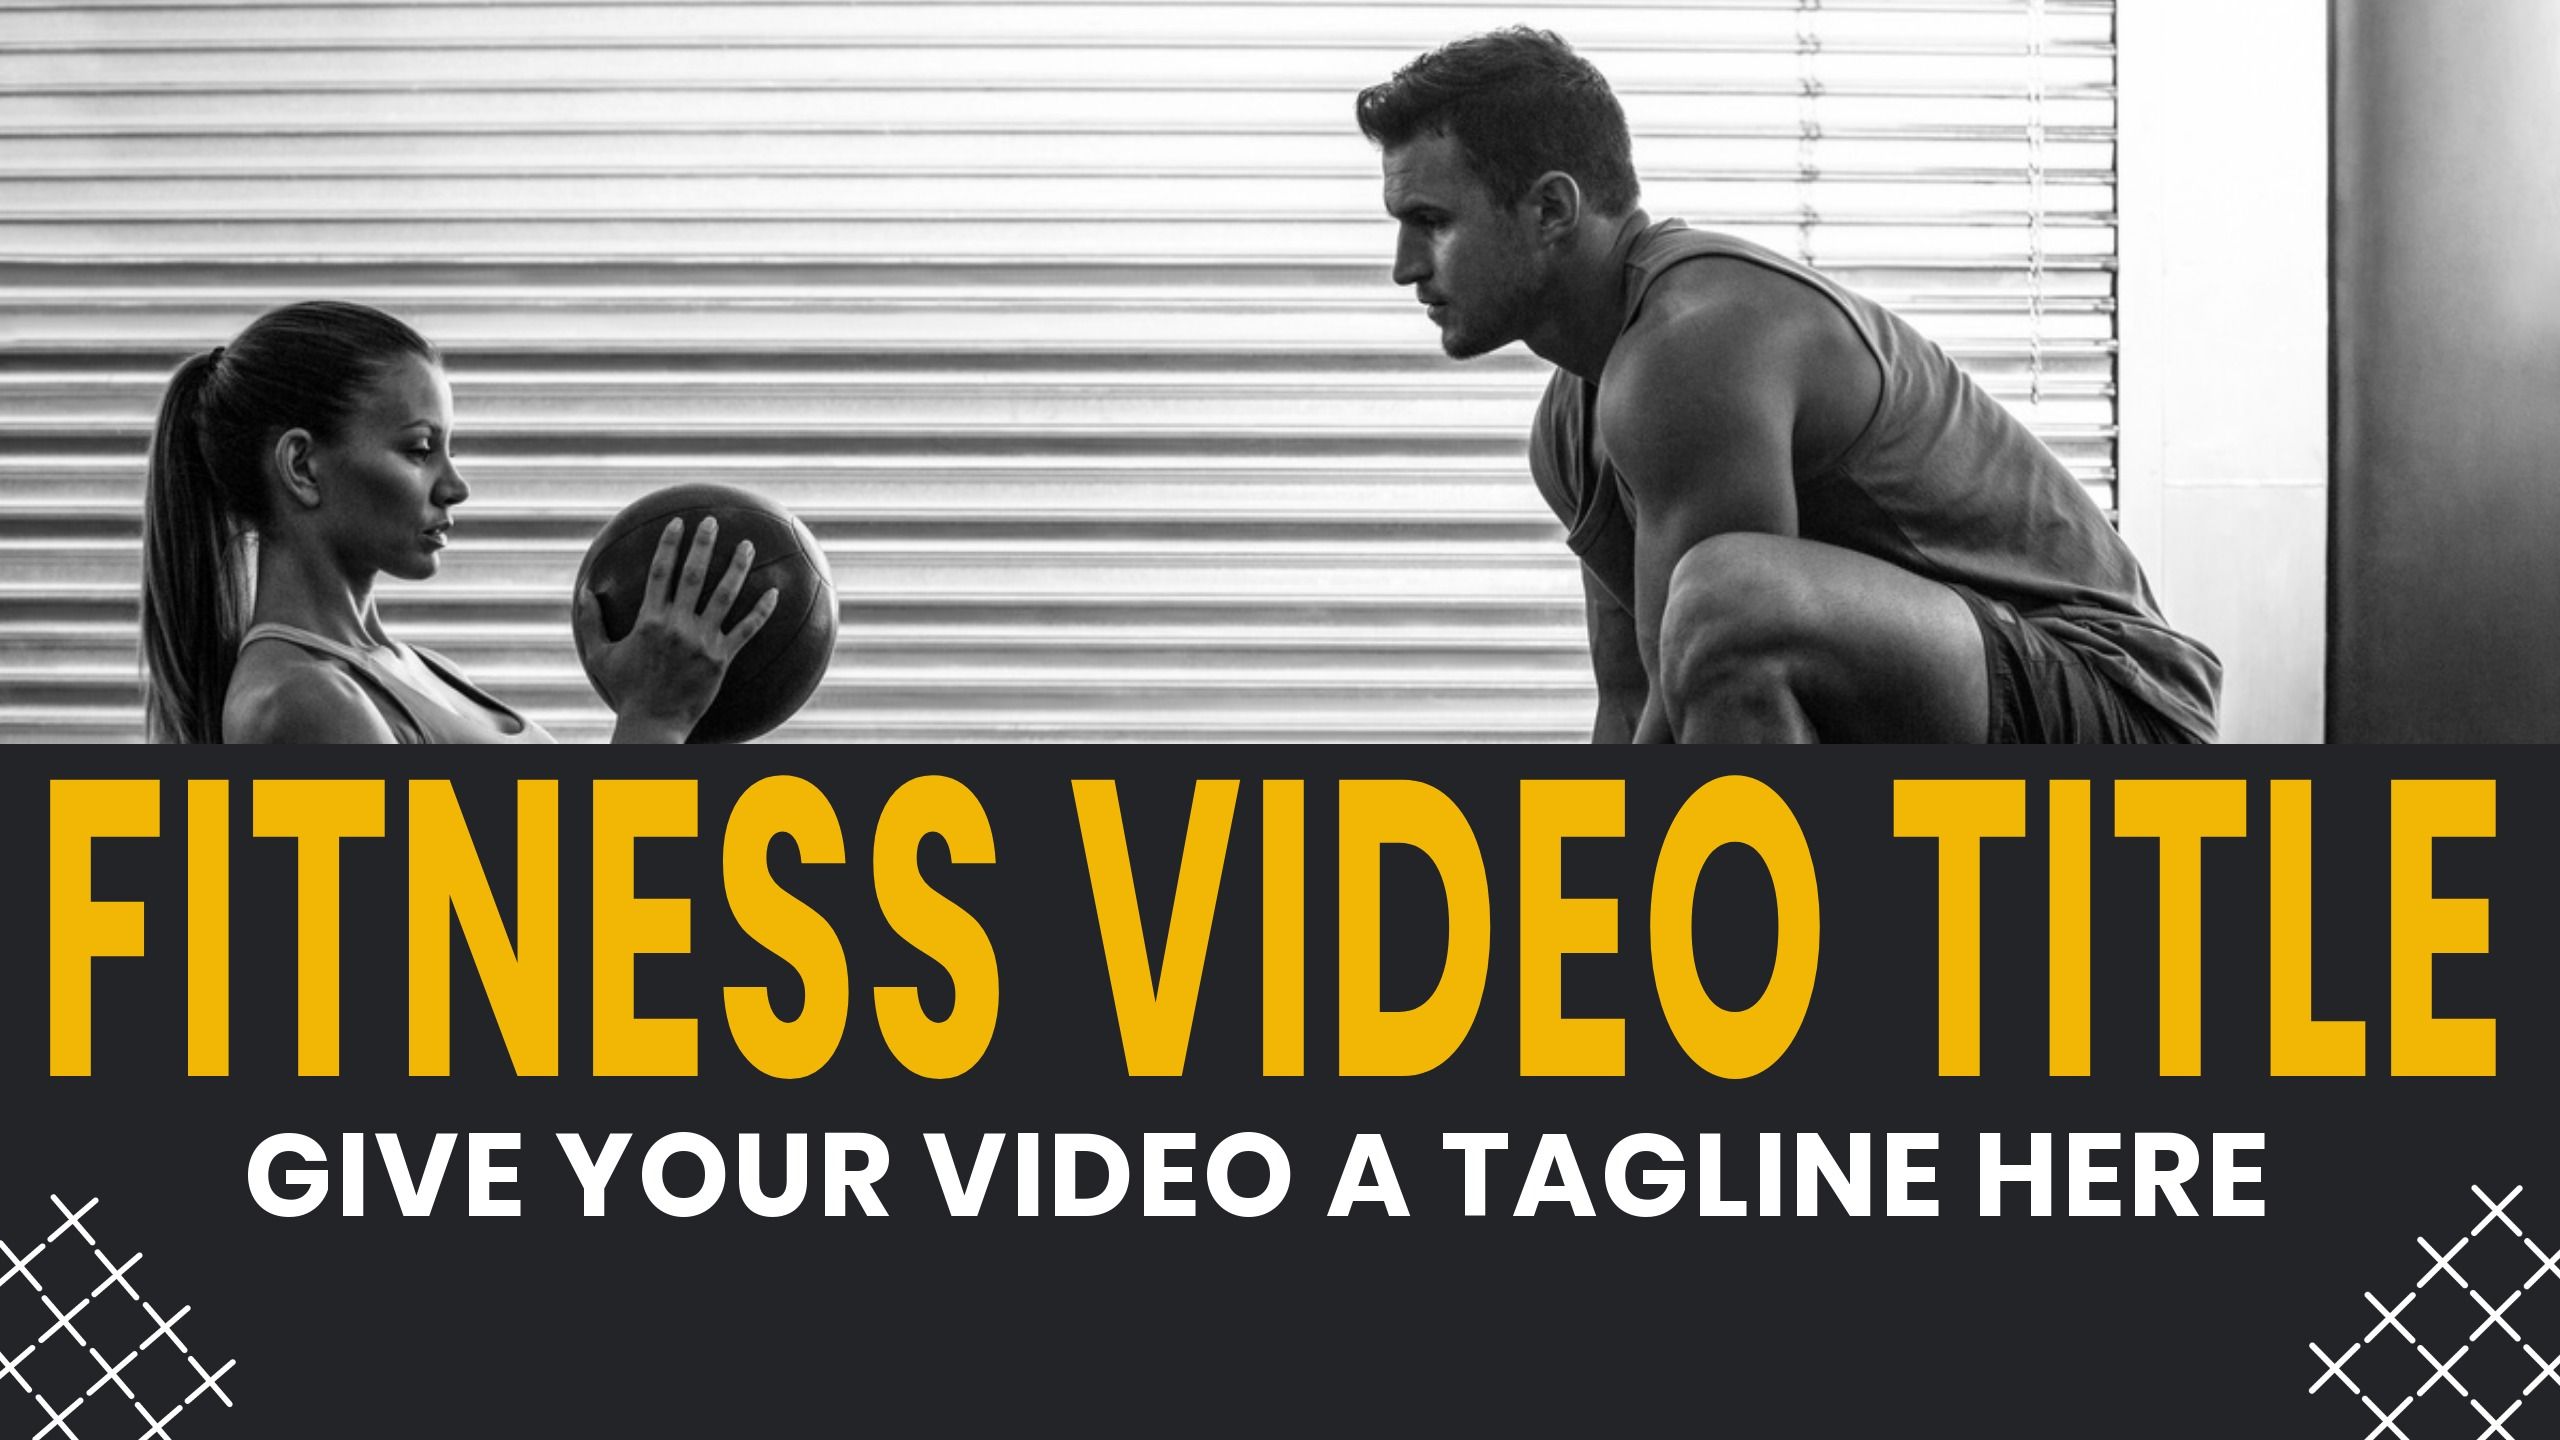 Fitness video thumbnail template - Step-by-step guide to designing YouTube thumbnails - Image